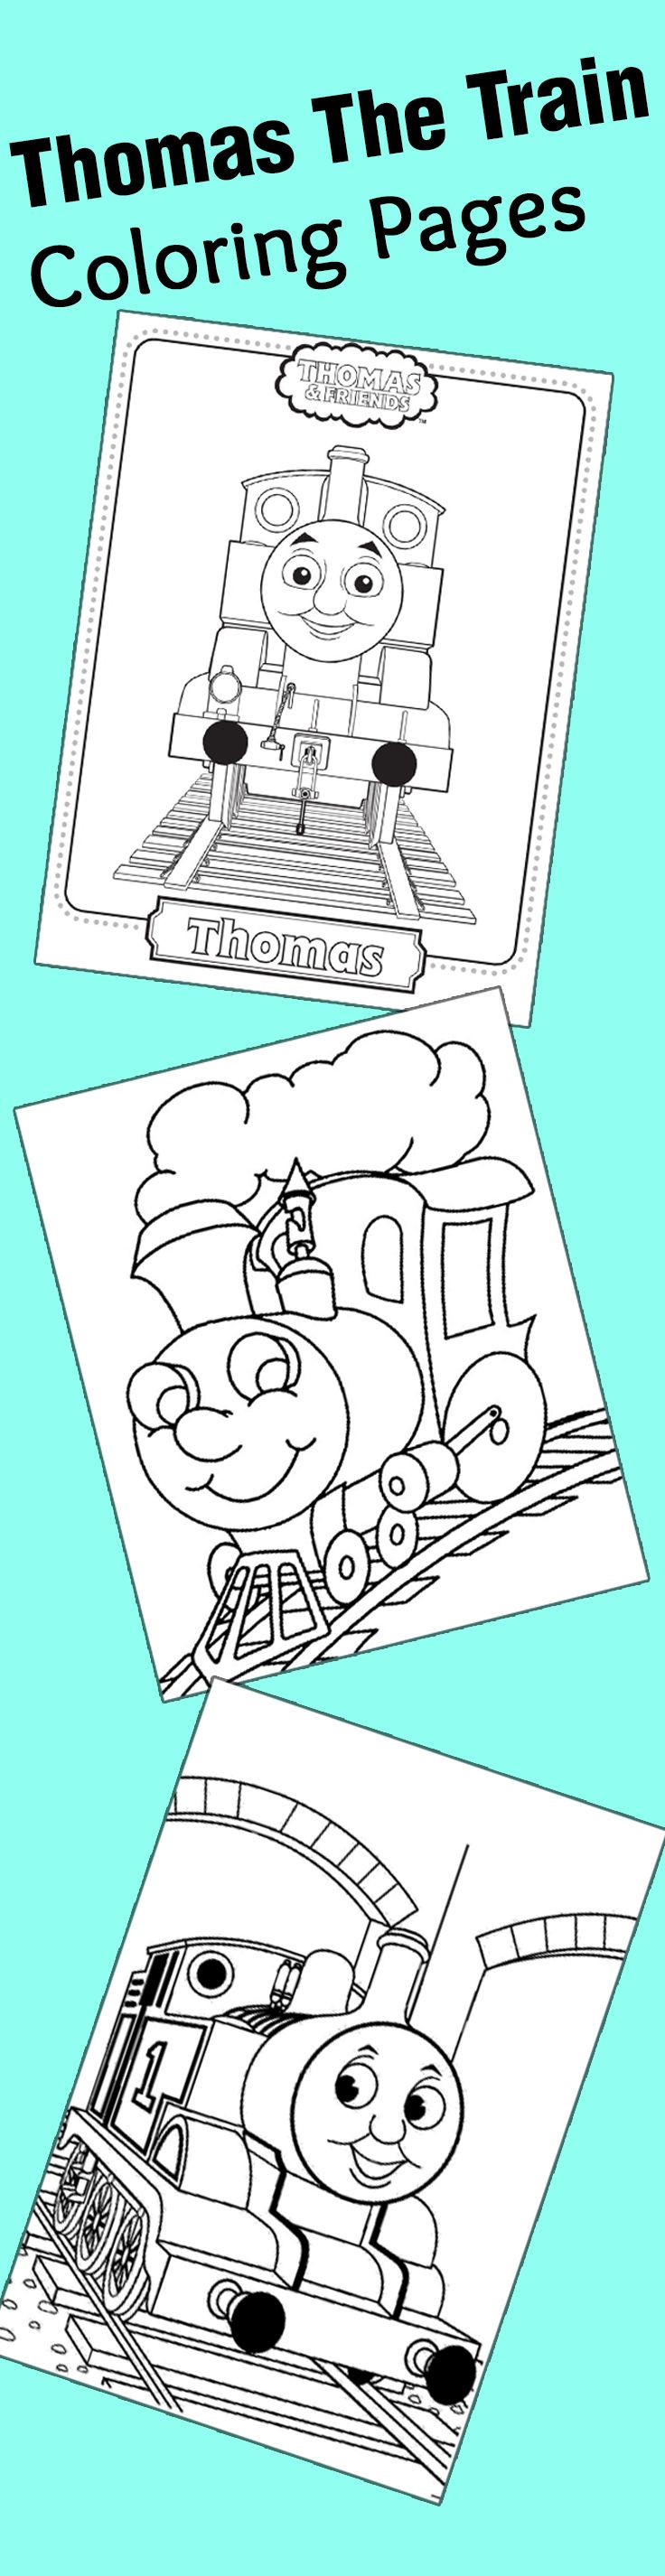 Top 20 Thomas The Train Coloring Pages Your Toddler Will Love: Thomas the train …